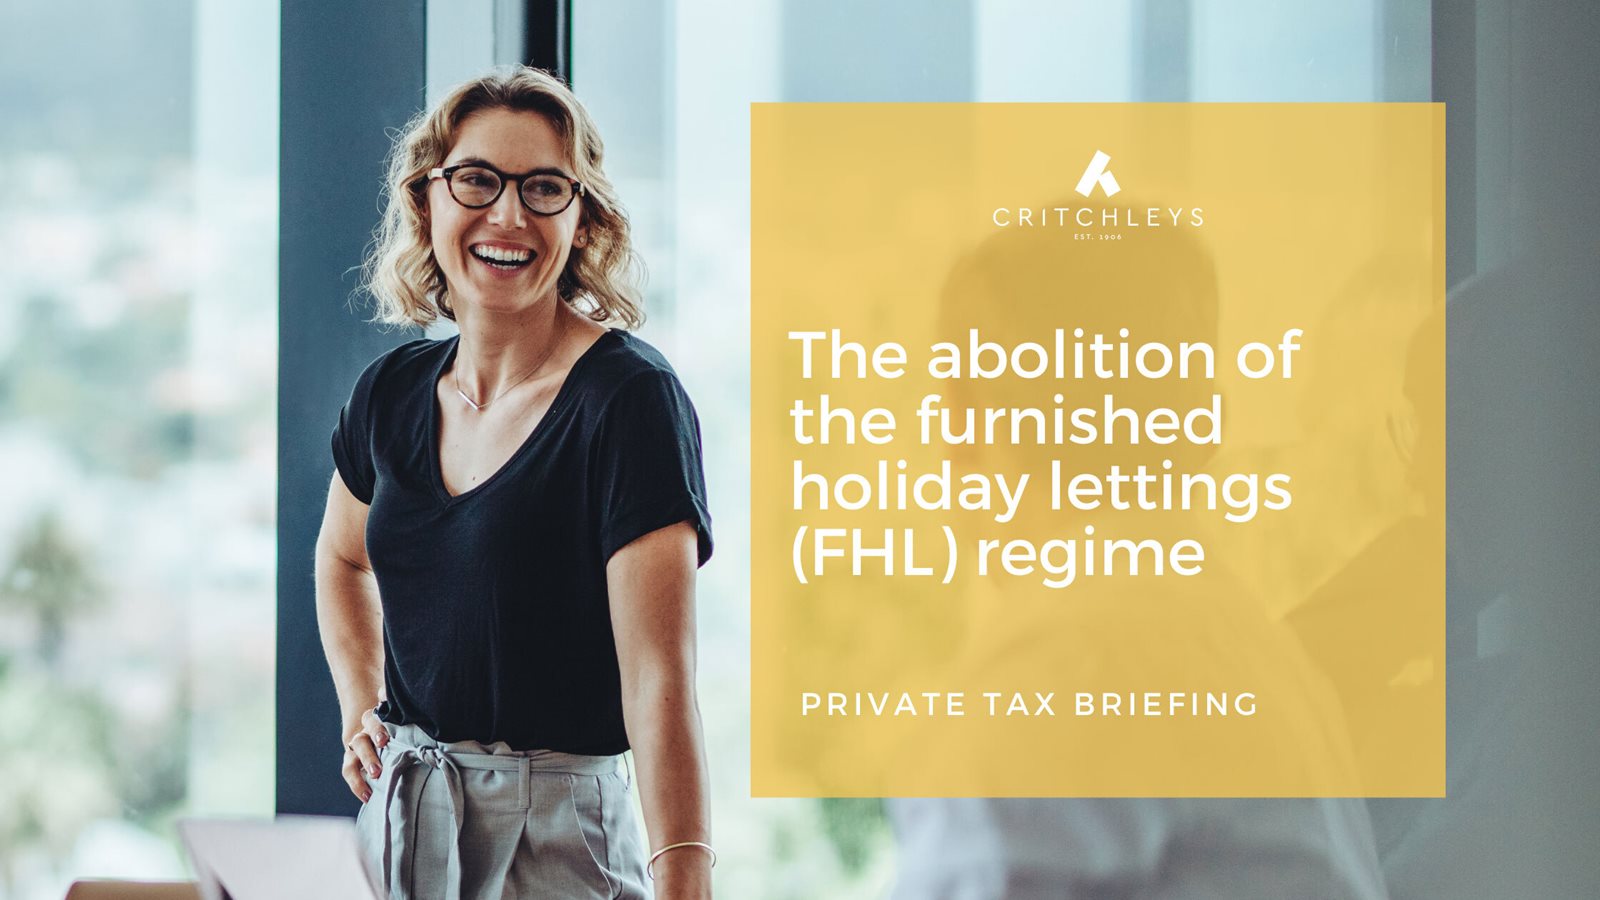 The abolition of the furnished holiday lettings (FHL) regime